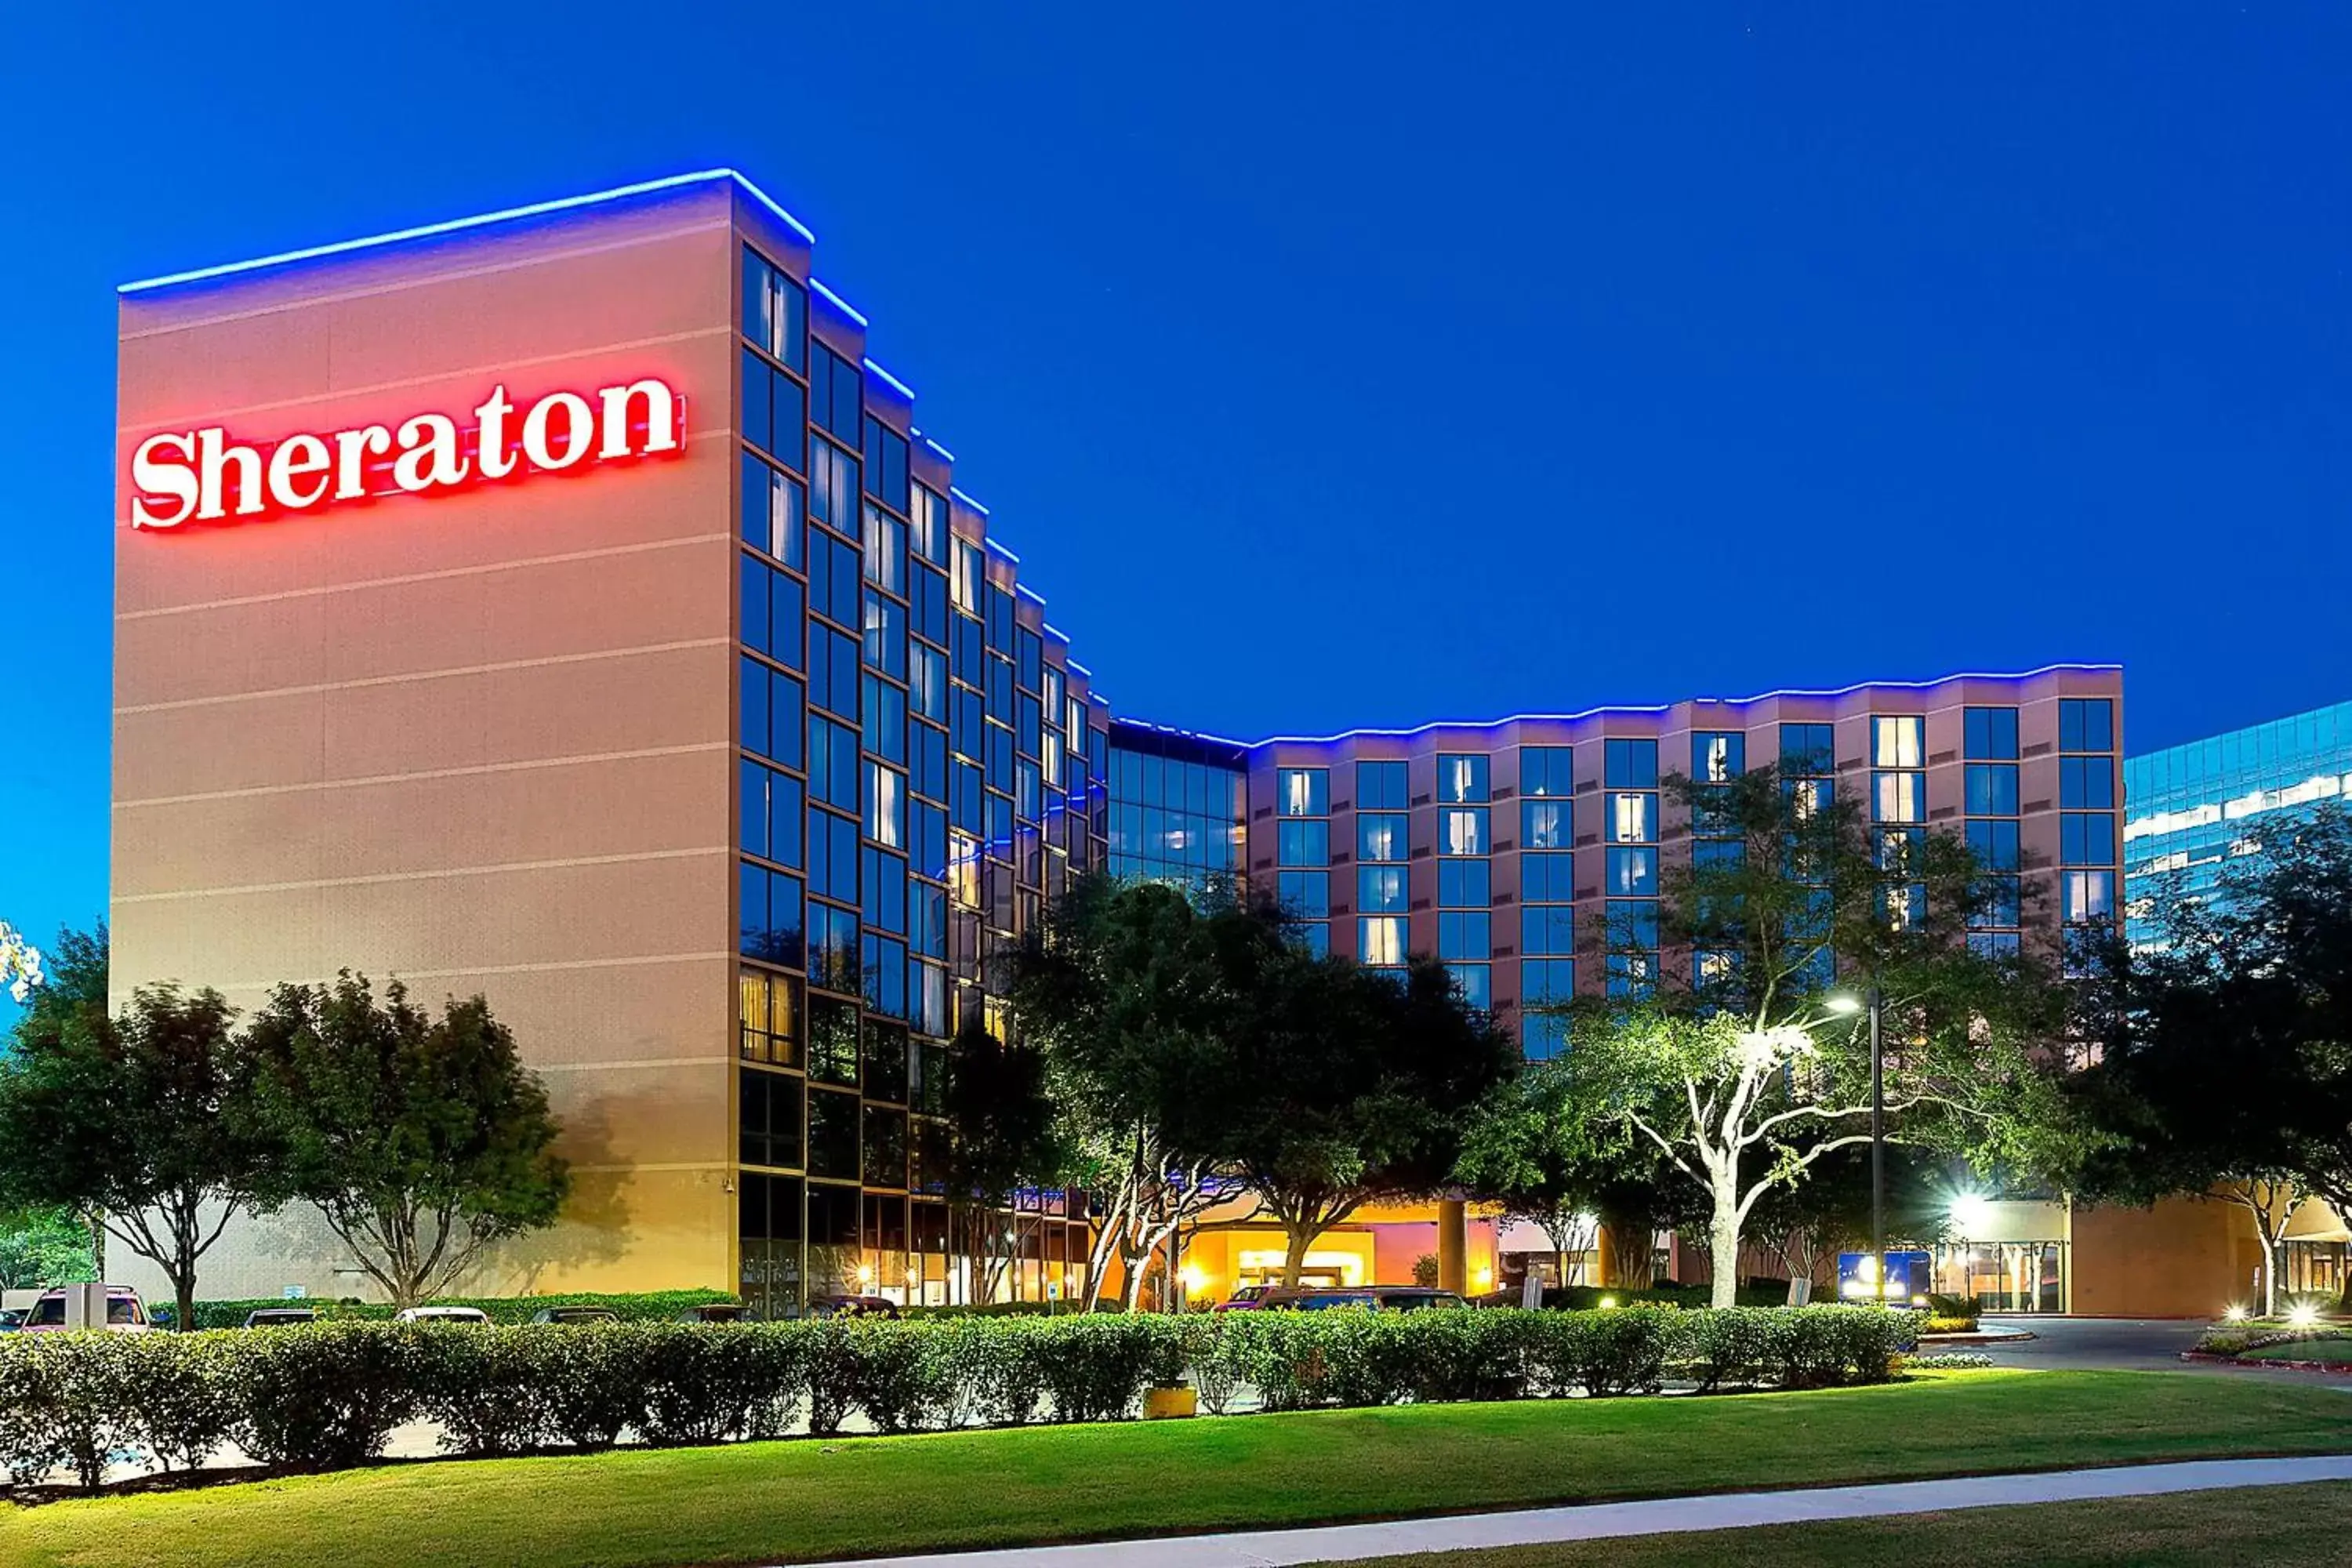 Property Building in Sheraton Houston Brookhollow